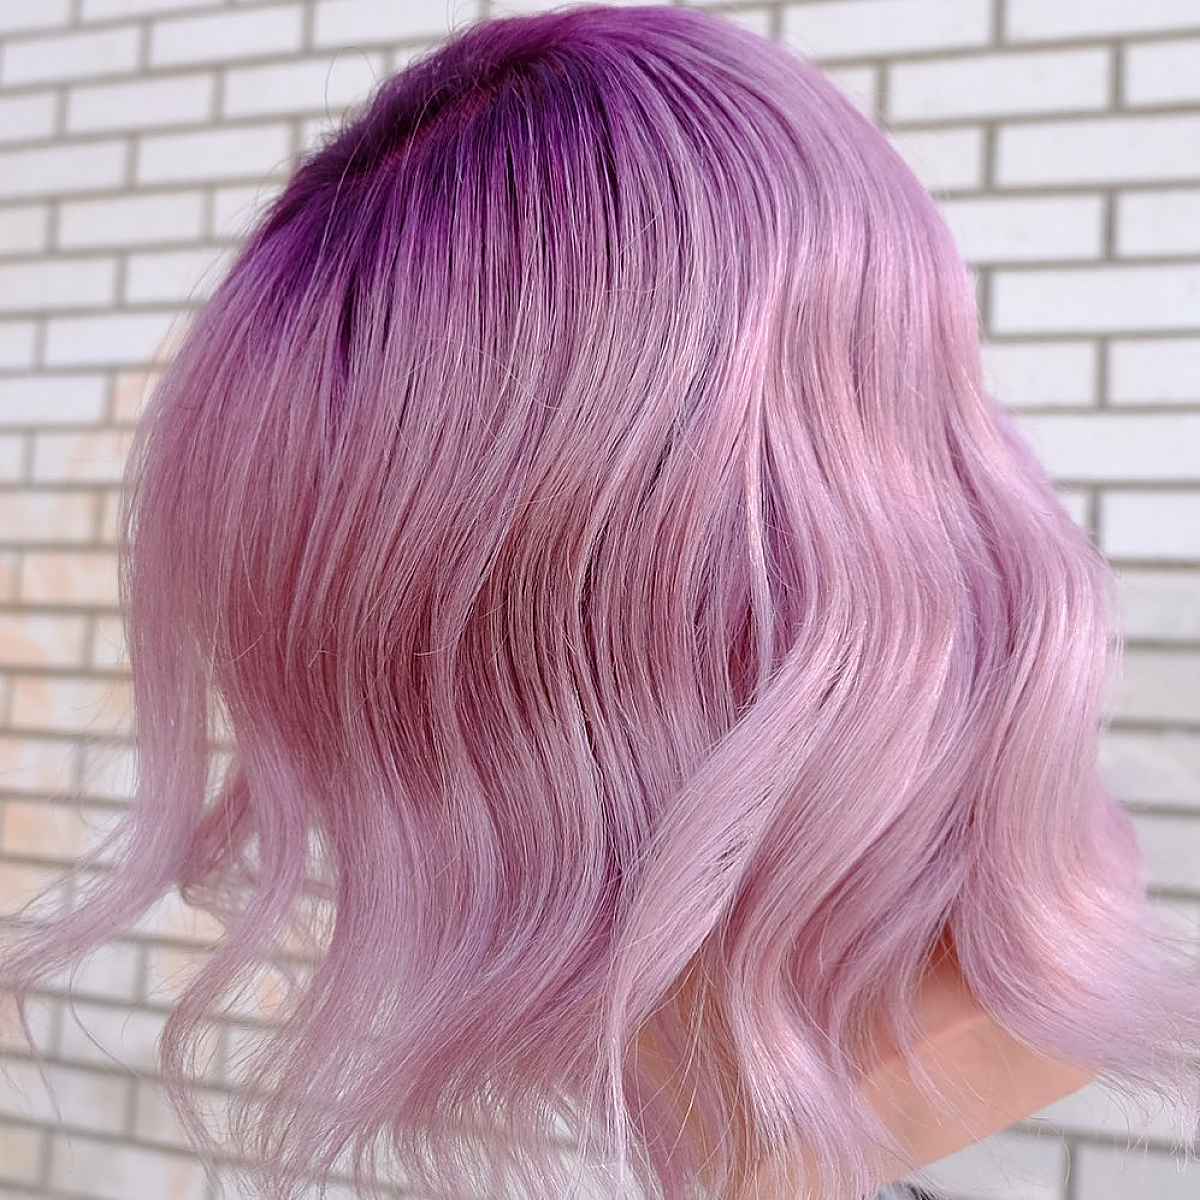 Top 22 Pastel Purple Hair Color Ideas You’ll See in 2021 - PDI-P.COM